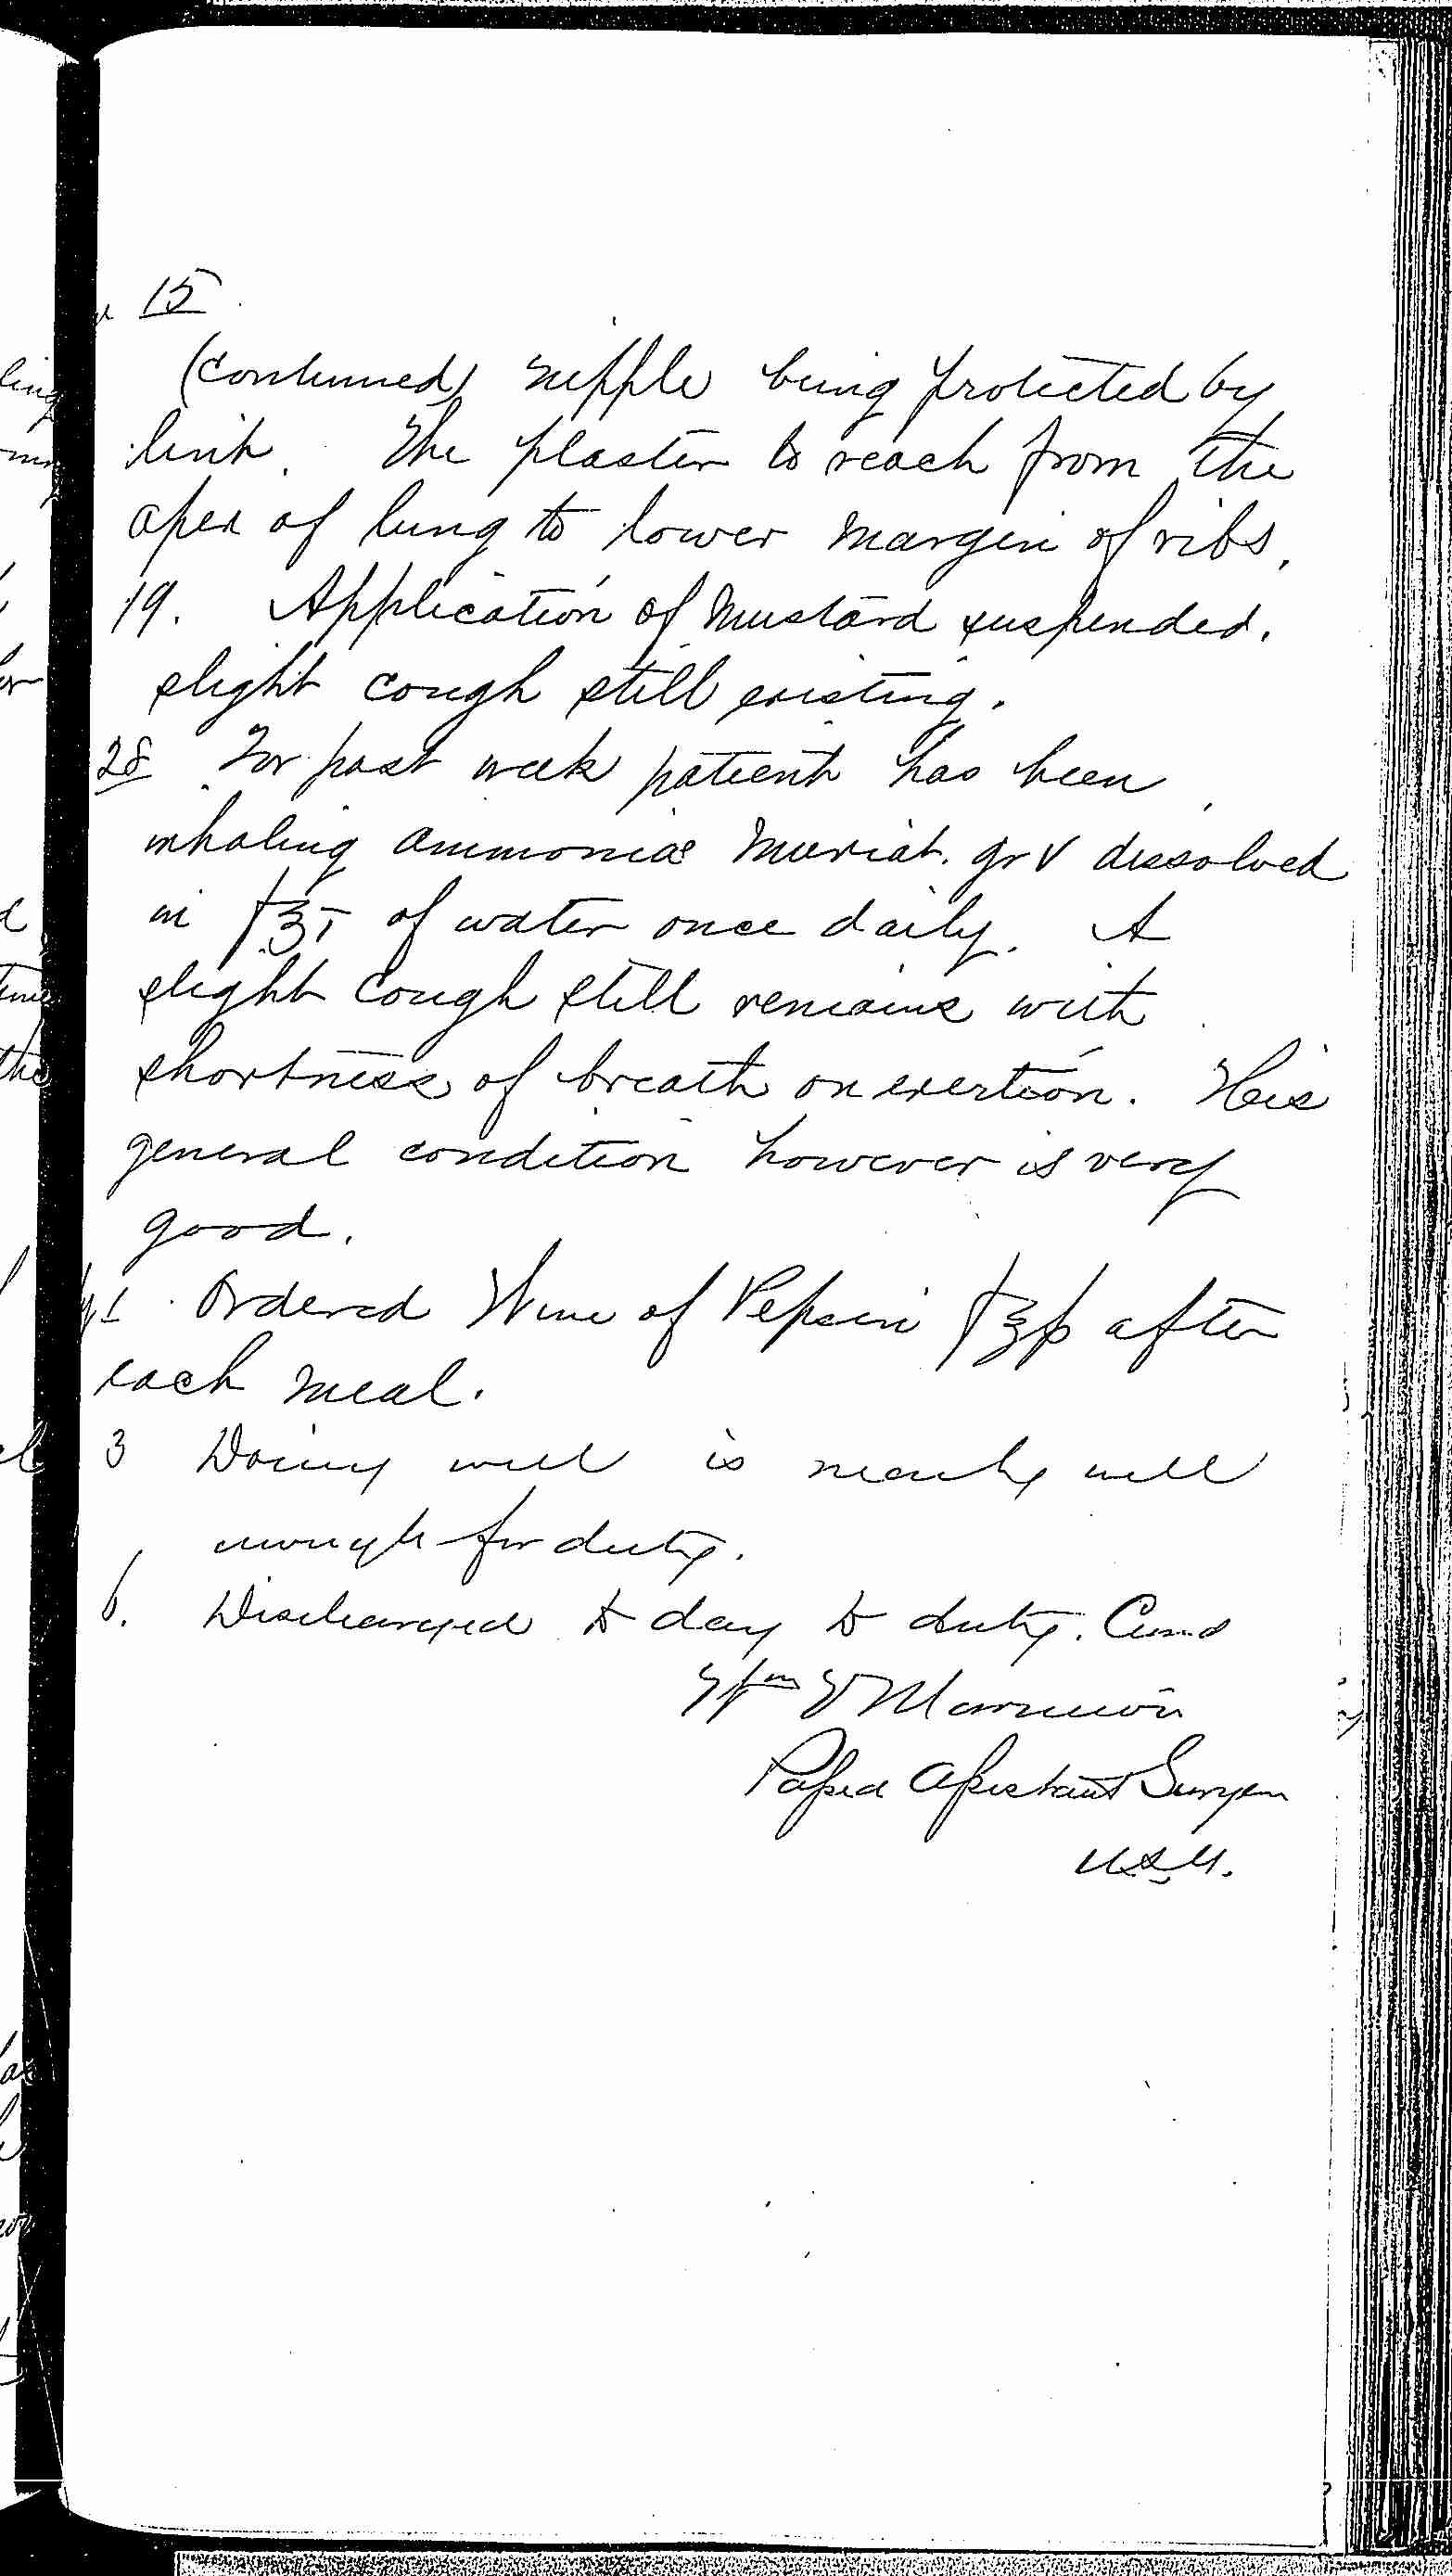 Entry for James W. Quinn (page 7 of 7) in the log Hospital Tickets and Case Papers - Naval Hospital - Washington, D.C. - 1868-69